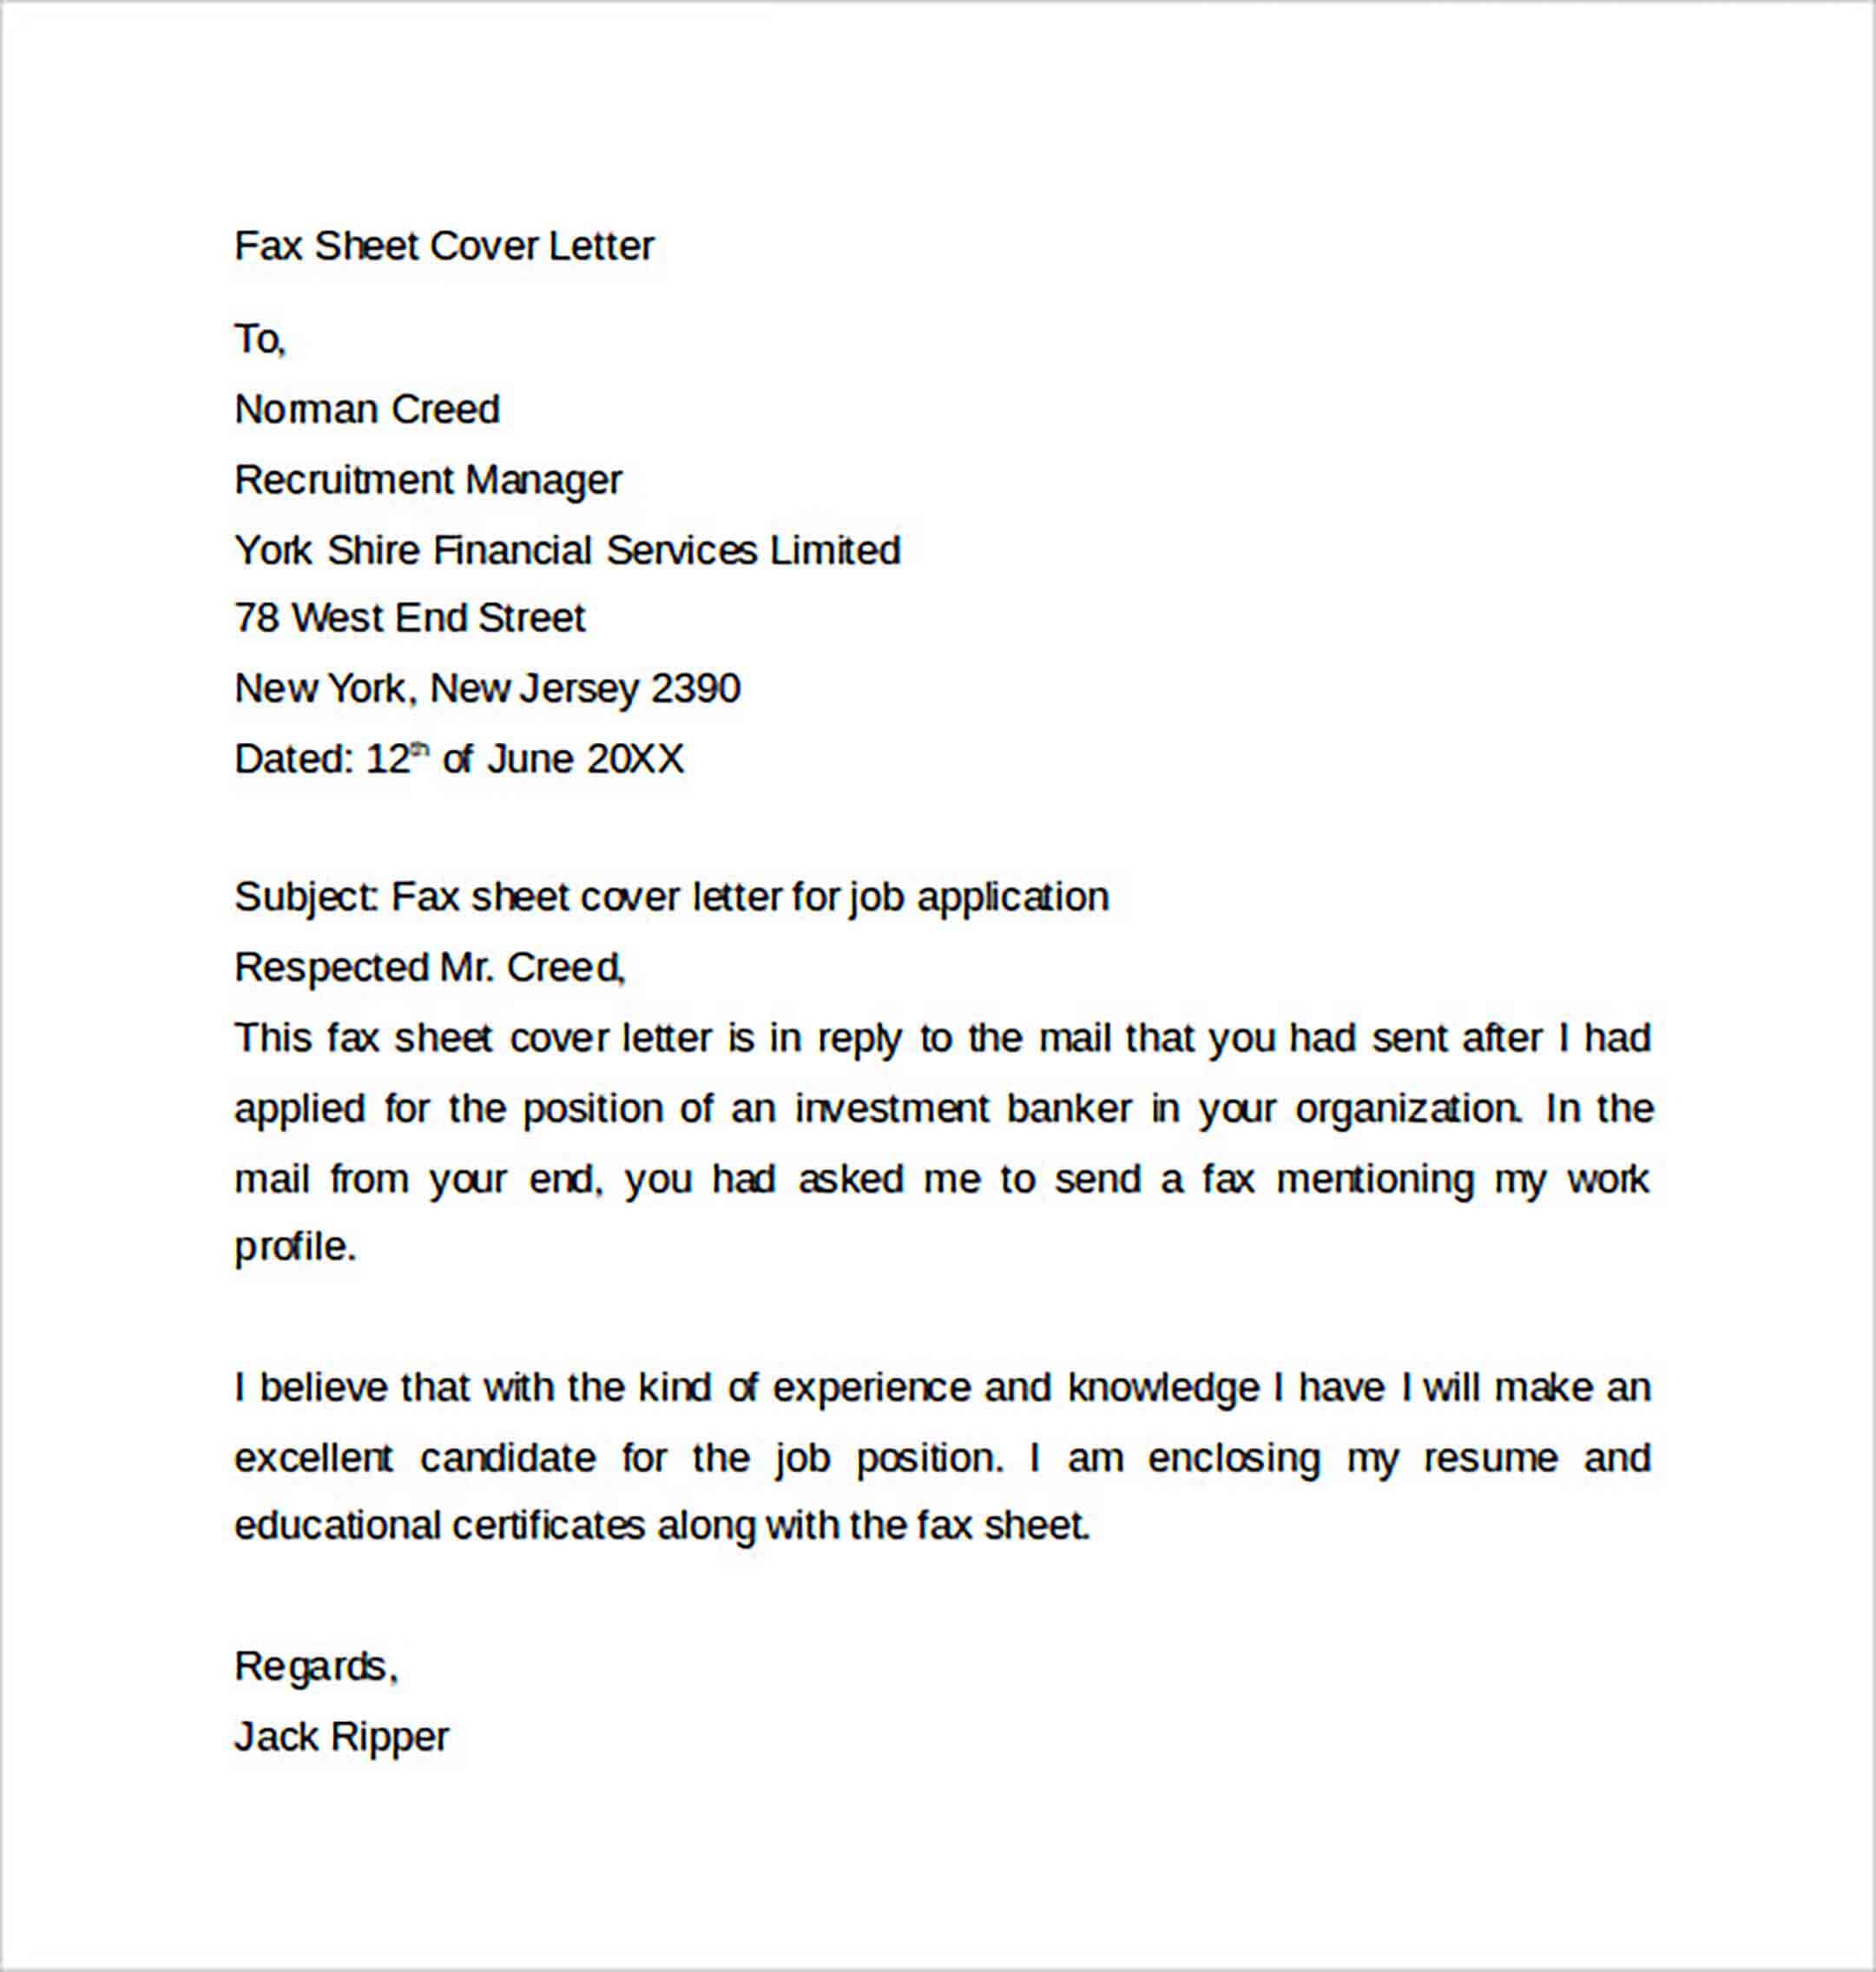 Fax Sheet Cover Letter